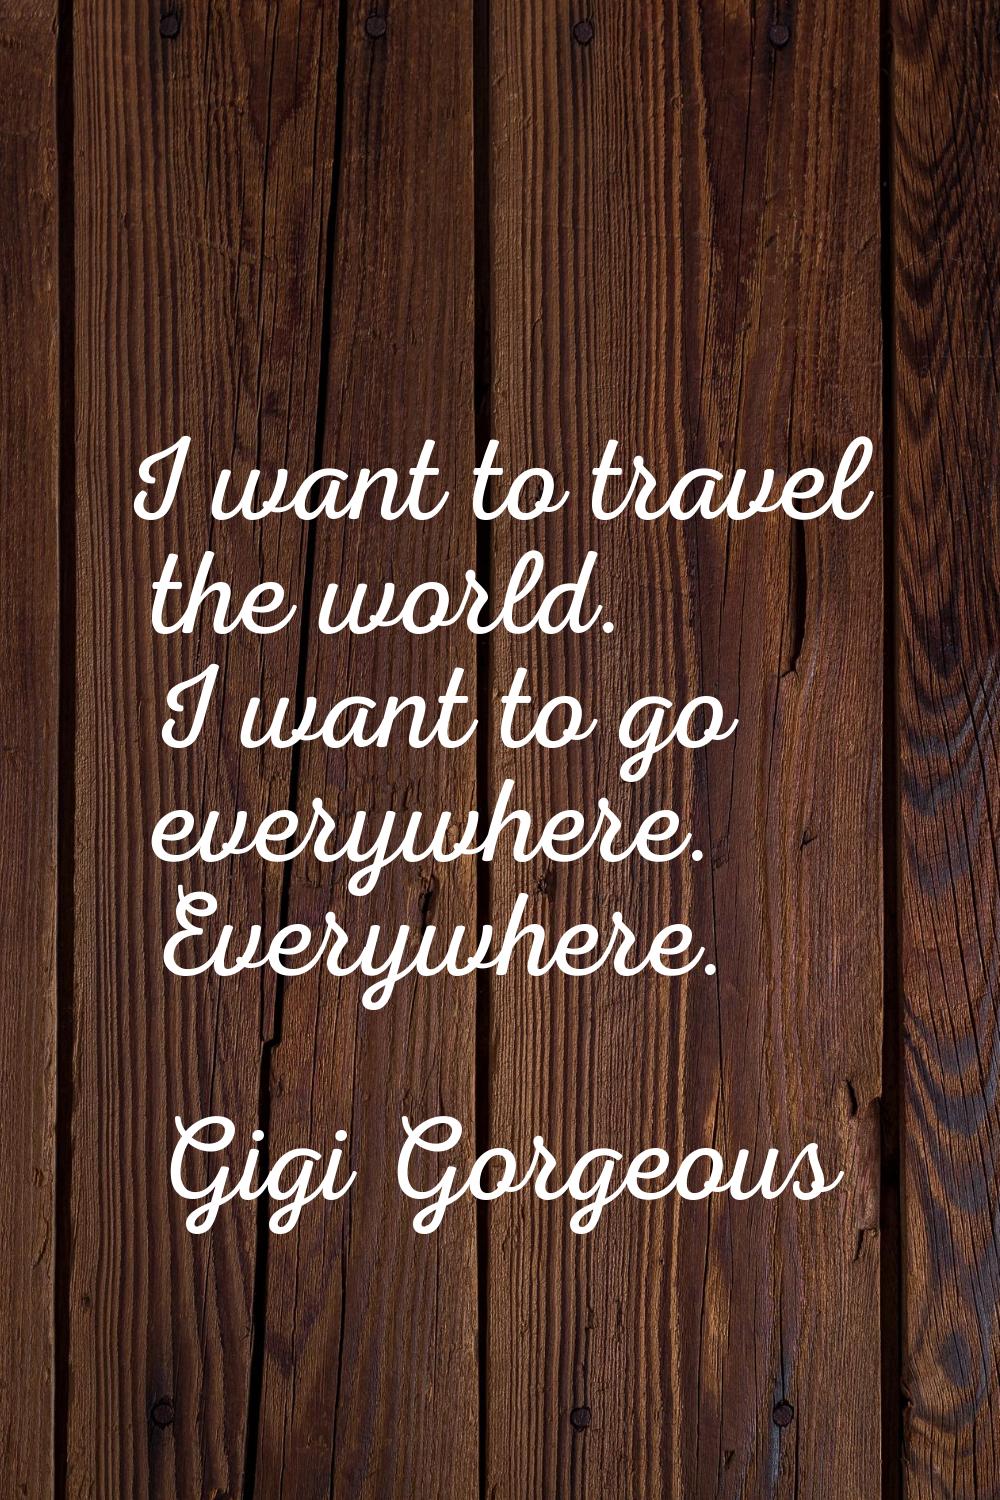 I want to travel the world. I want to go everywhere. Everywhere.